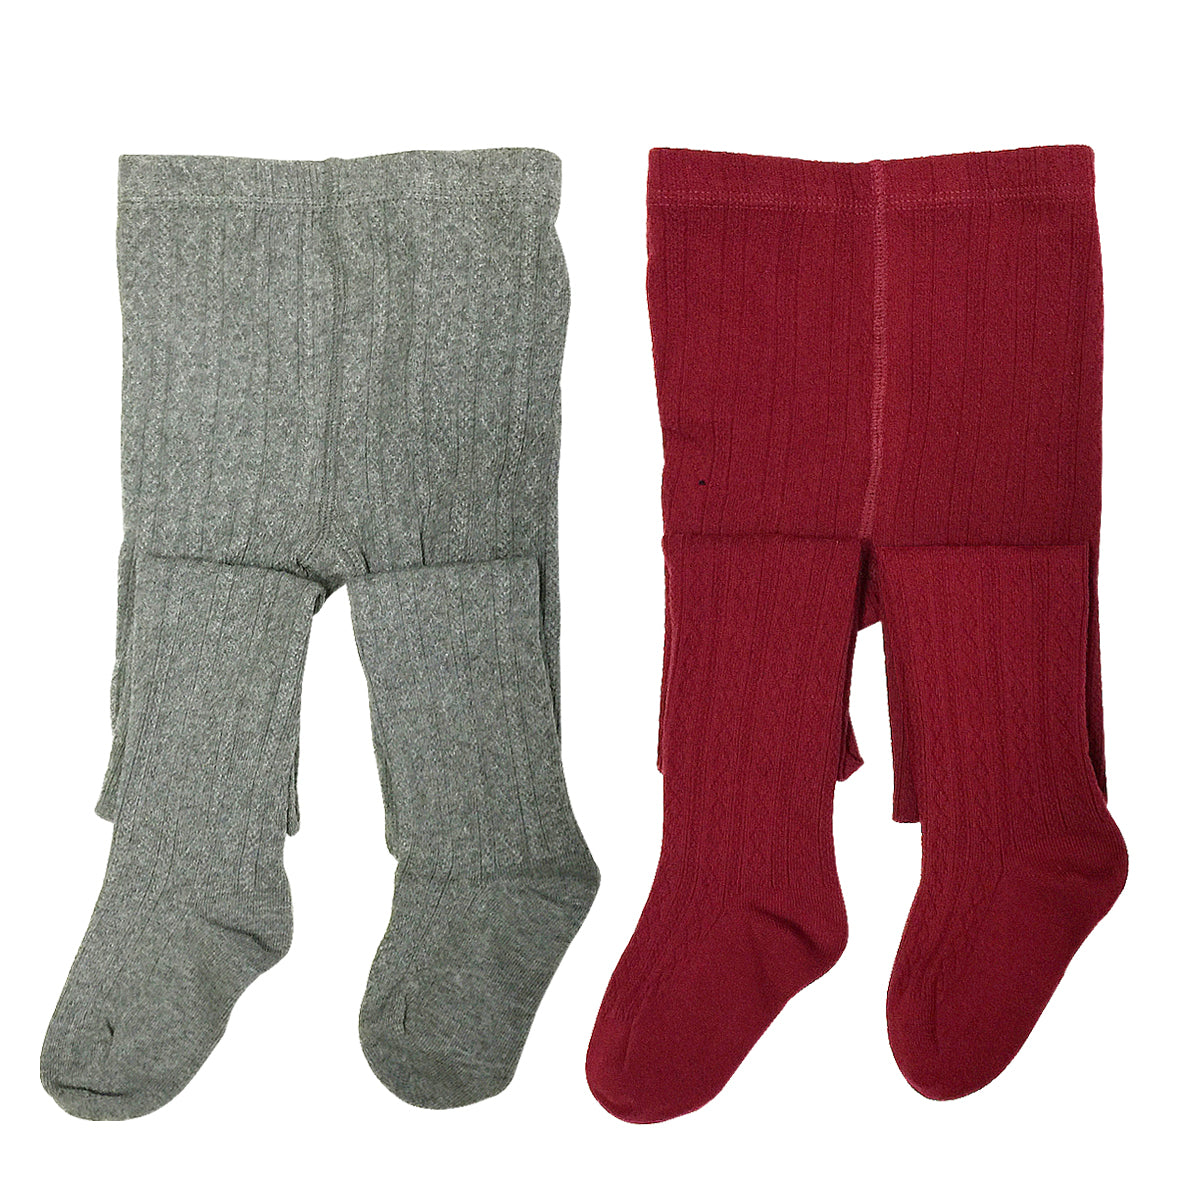 Wrapables Burgundy and Gray Cotton Diamond Weave Knit Tights for Girls (Set of 2)